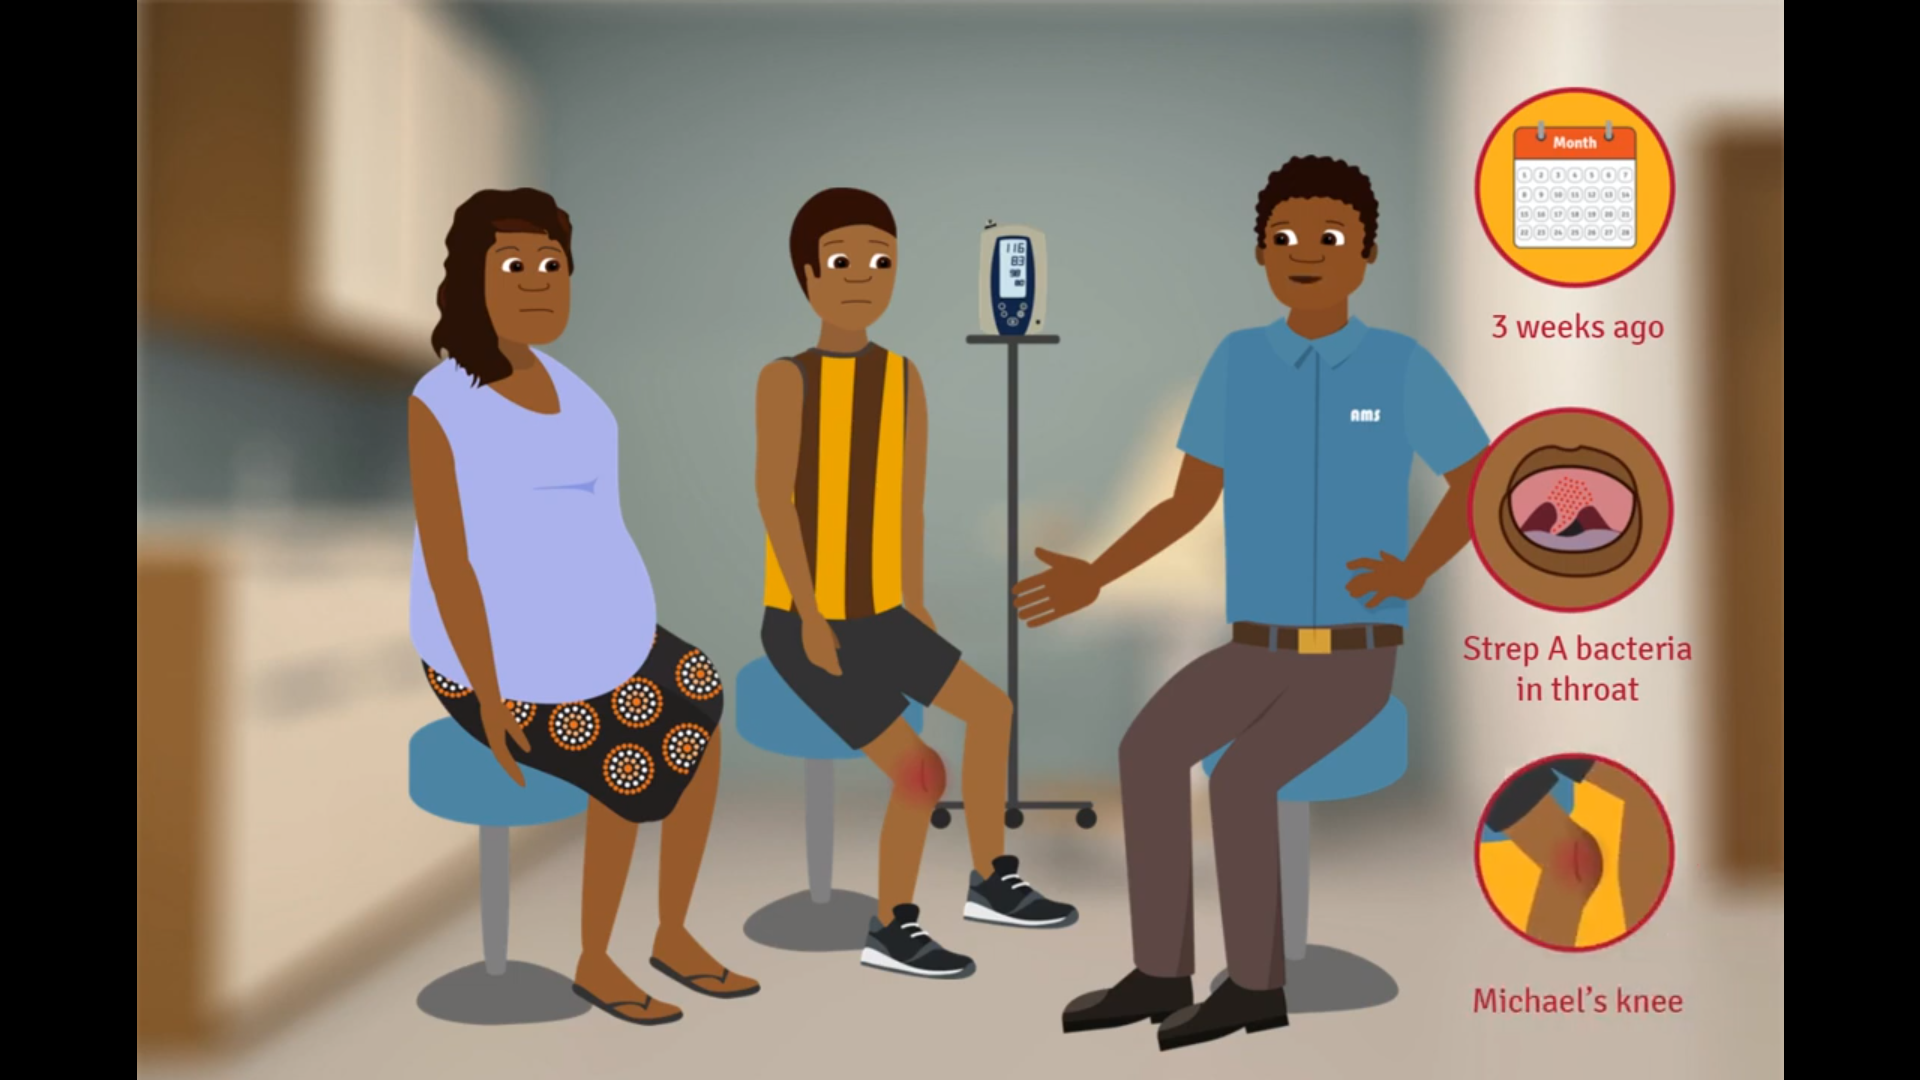 This animated video follows the story of a 14 year old Aboriginal boy named Michael and his Aunty Mary. Michael visits the doctor with a sore knee and fever, and the doctor is worried that Michael has acute rheumatic fever. 